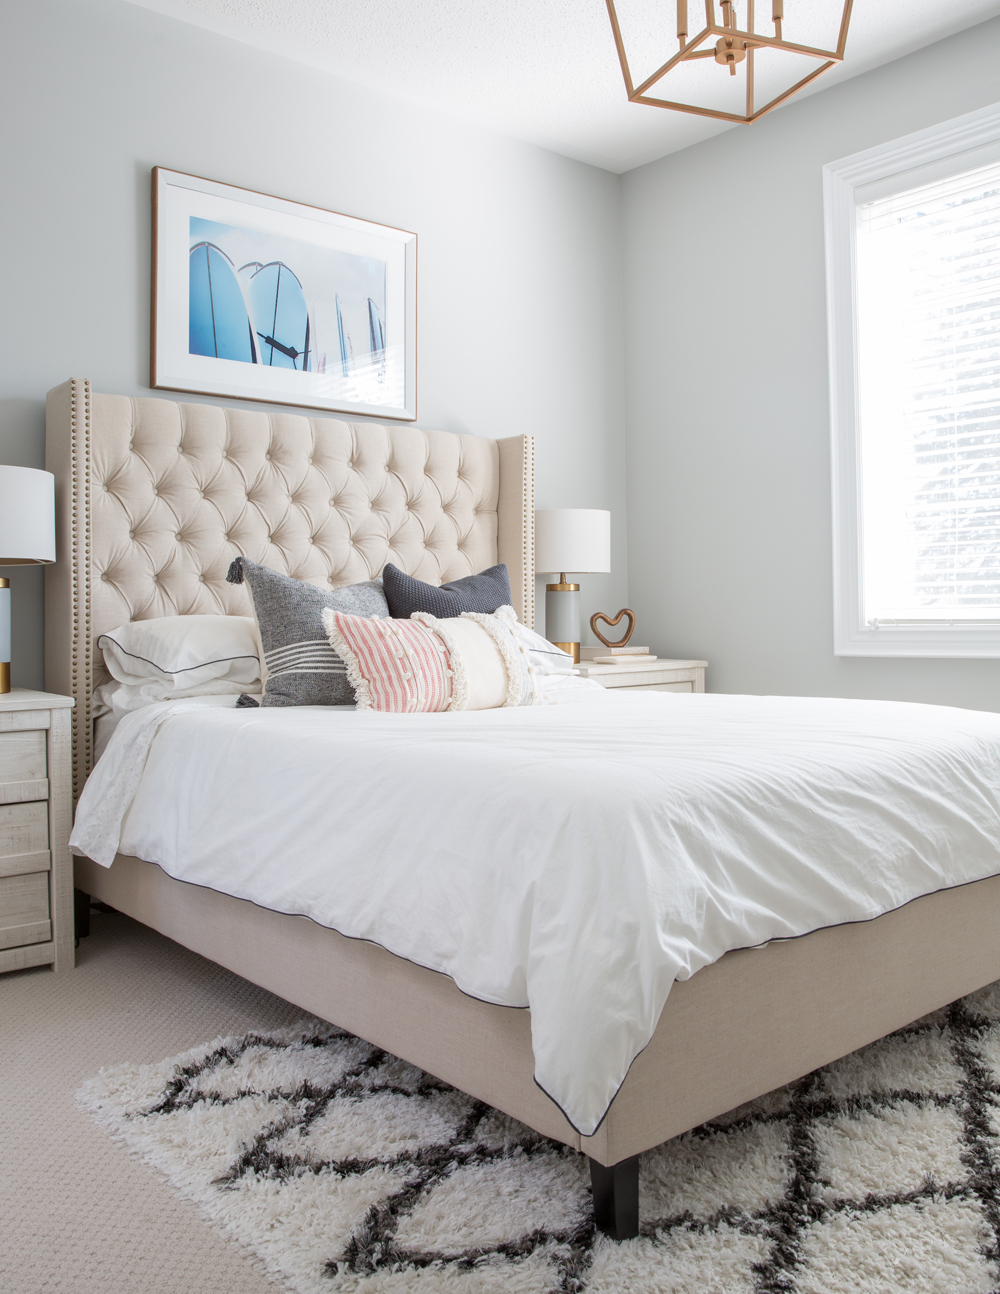 pink tufted headboard, blue framed art above, black and white area rug over wall to wall carpet